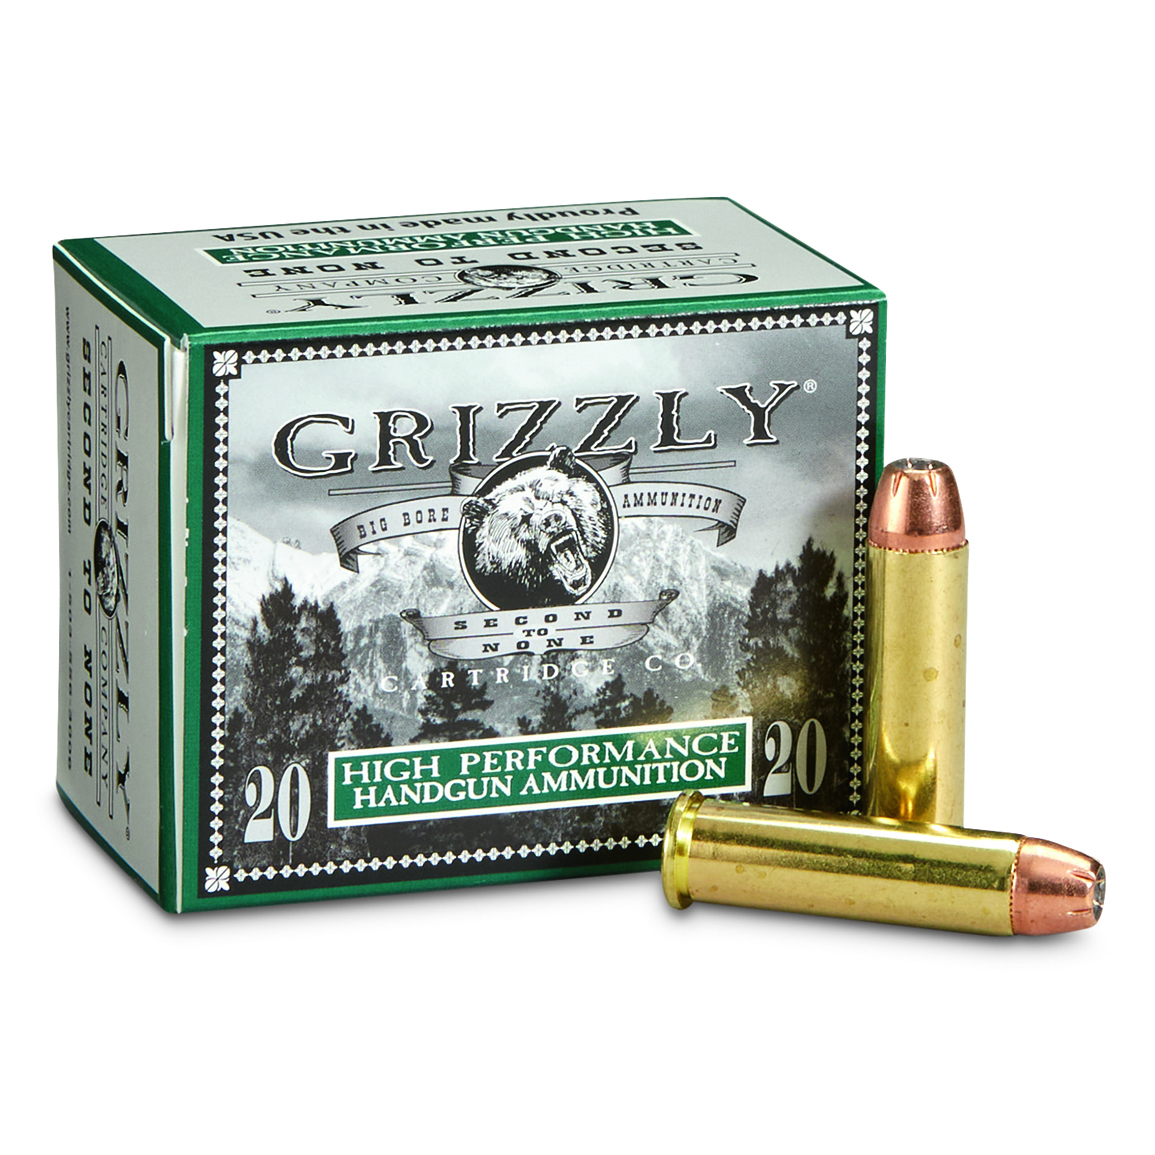 Grizzly Cartridge Co. Cowboy Action Ammo, .357 Magnum, JHP, 158 Grain, 20 Rounds